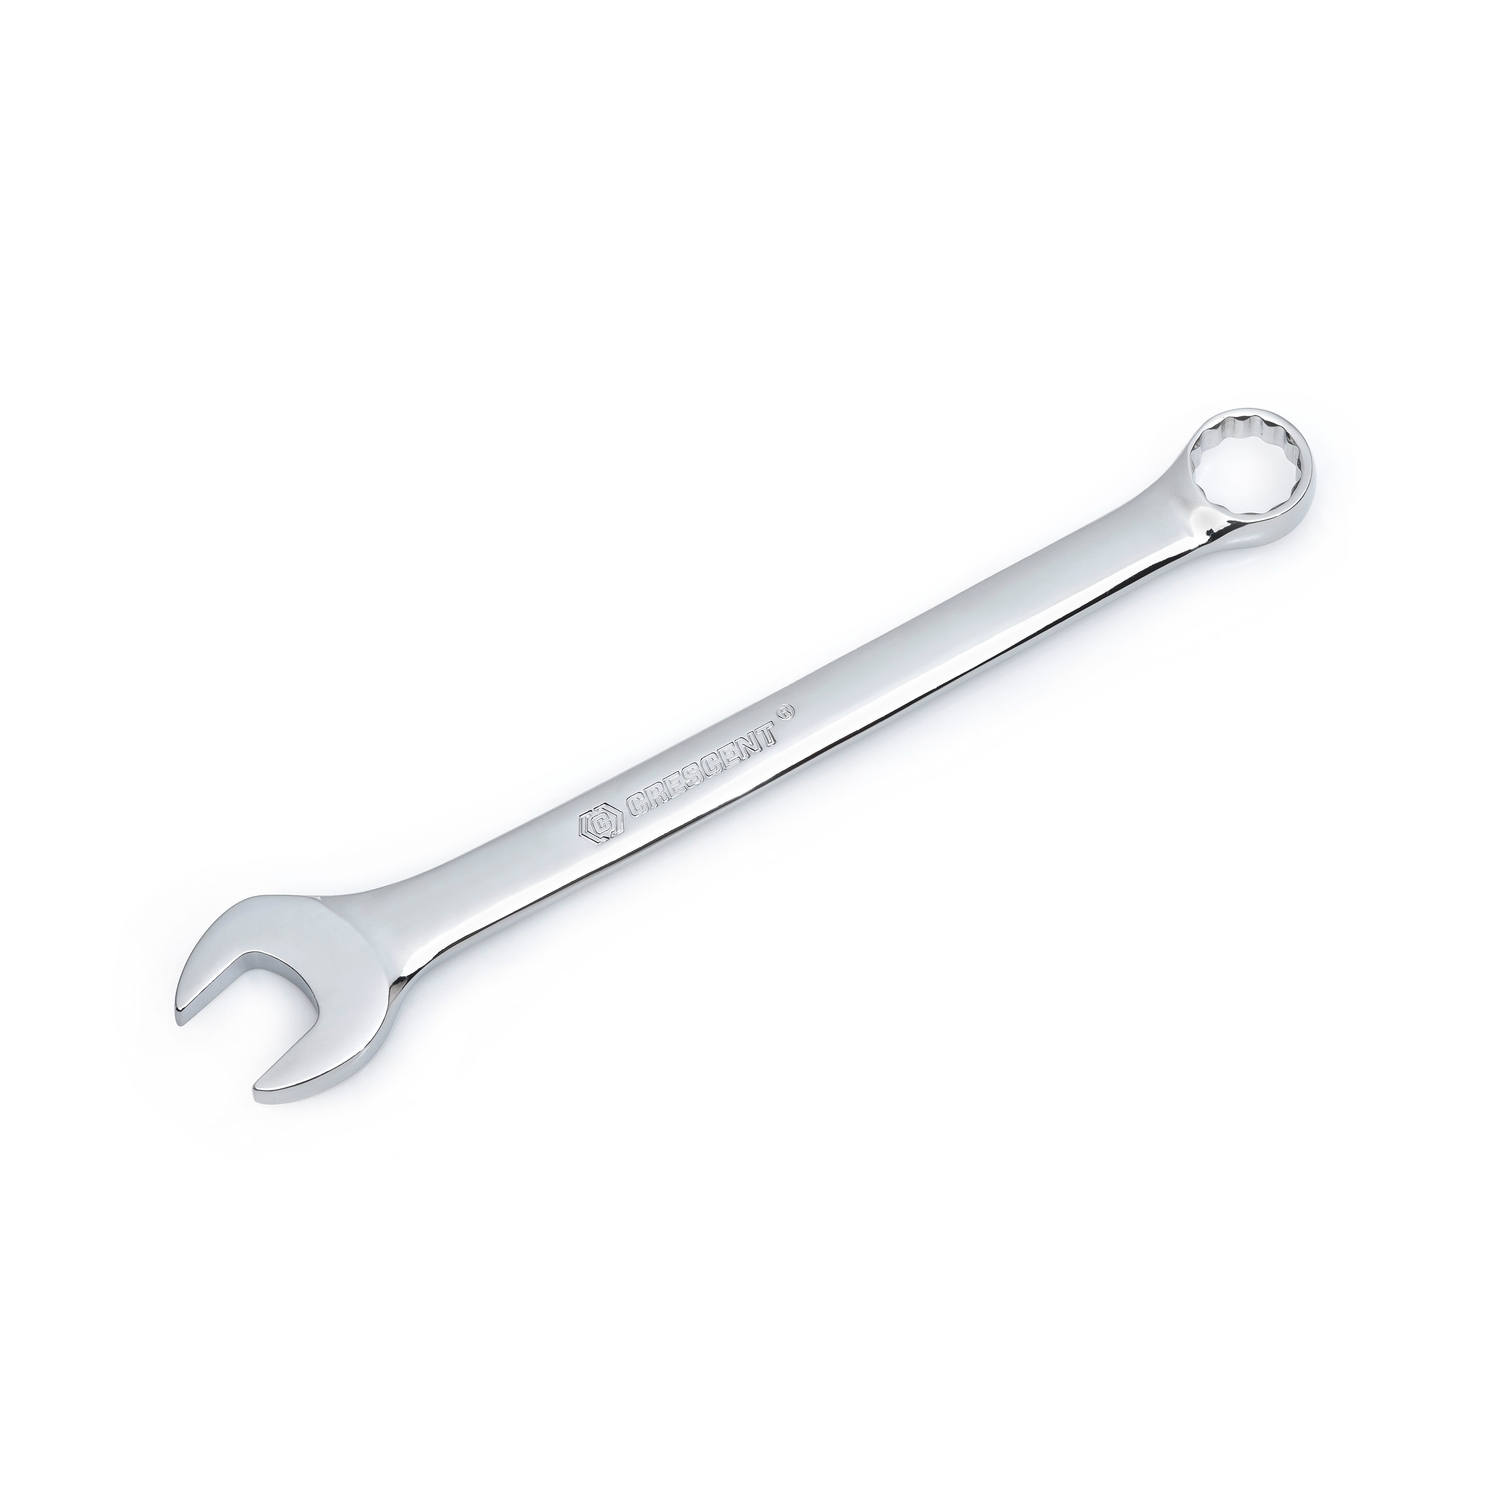 Crescent 11mm Metric Combination Wrench Ccw22